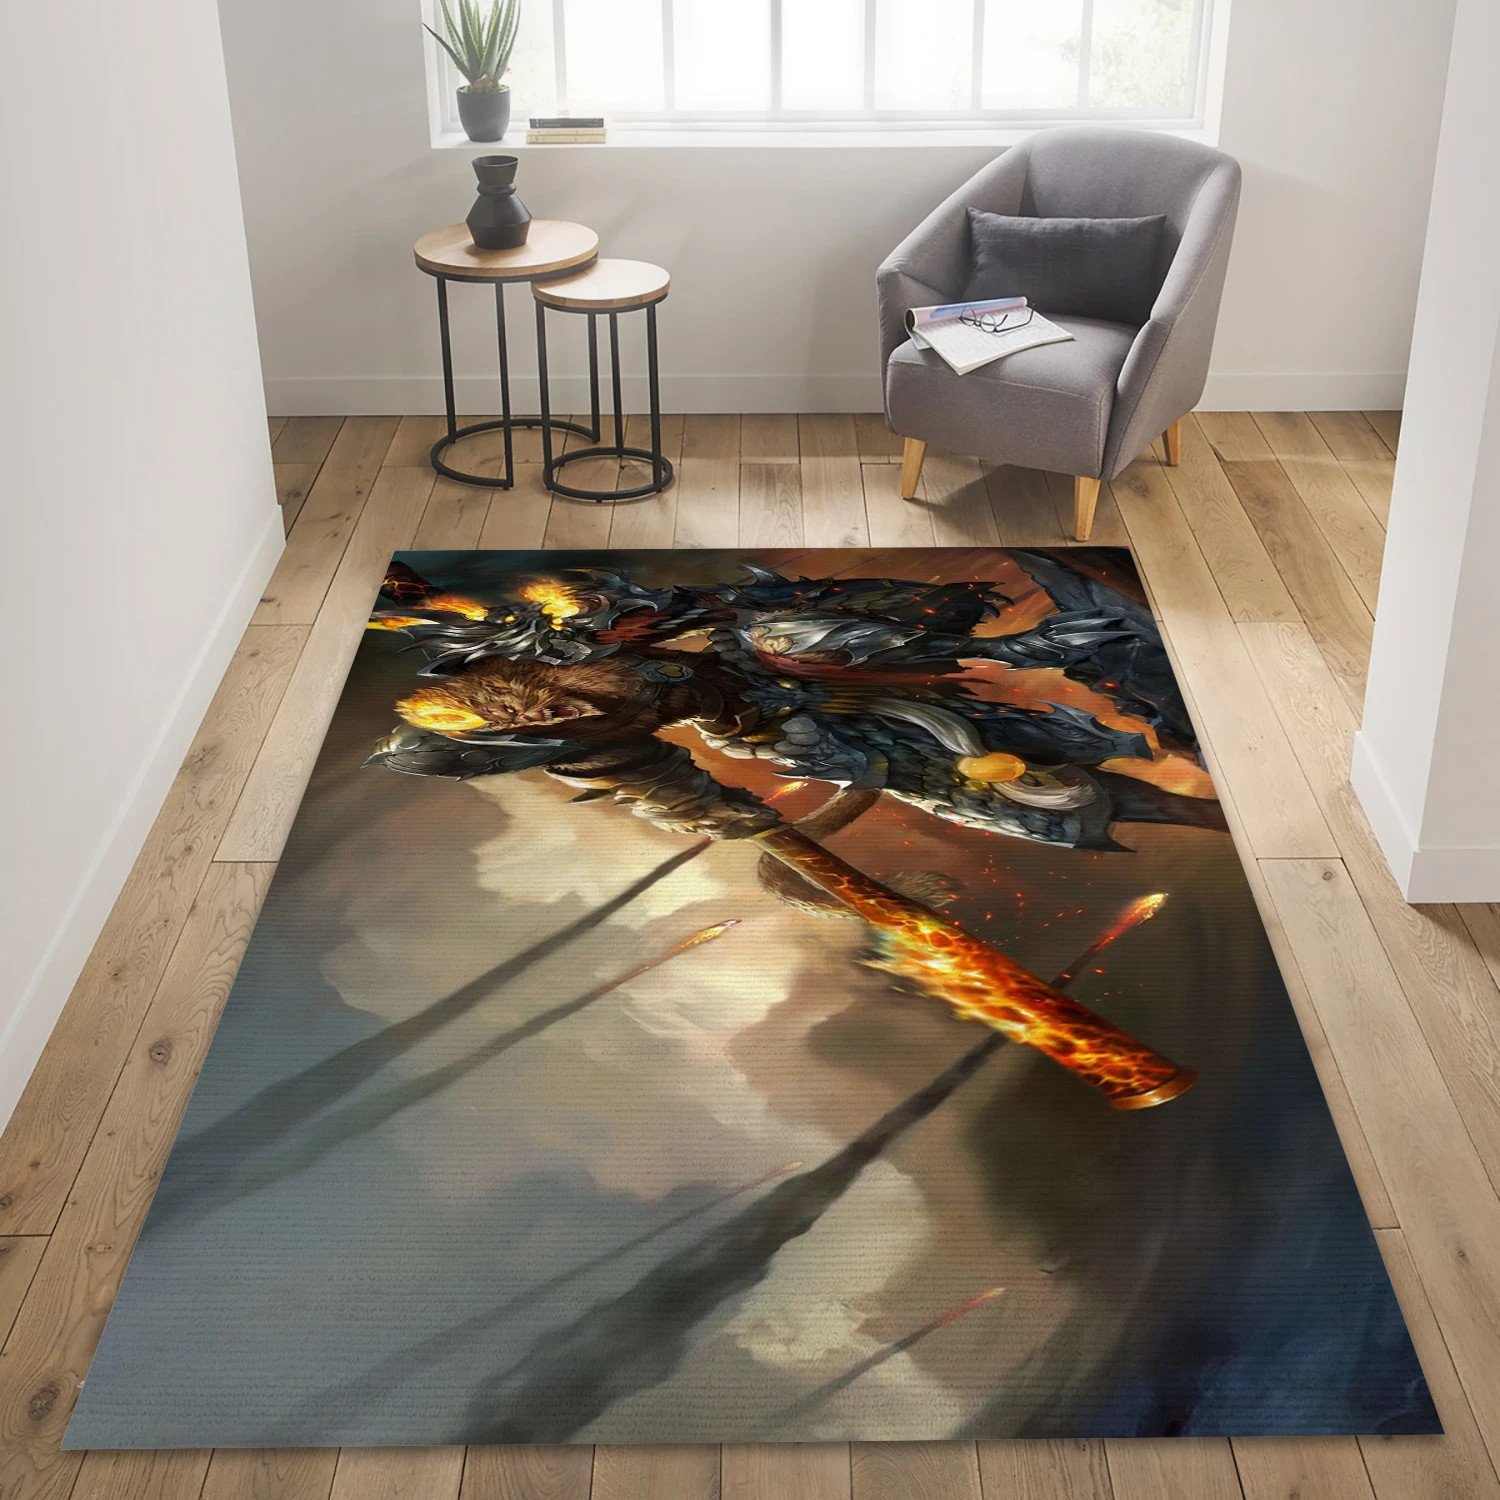 Wukong League Of Legends Video Game Area Rug For Christmas, Bedroom Rug - Christmas Gift Decor - Indoor Outdoor Rugs 2